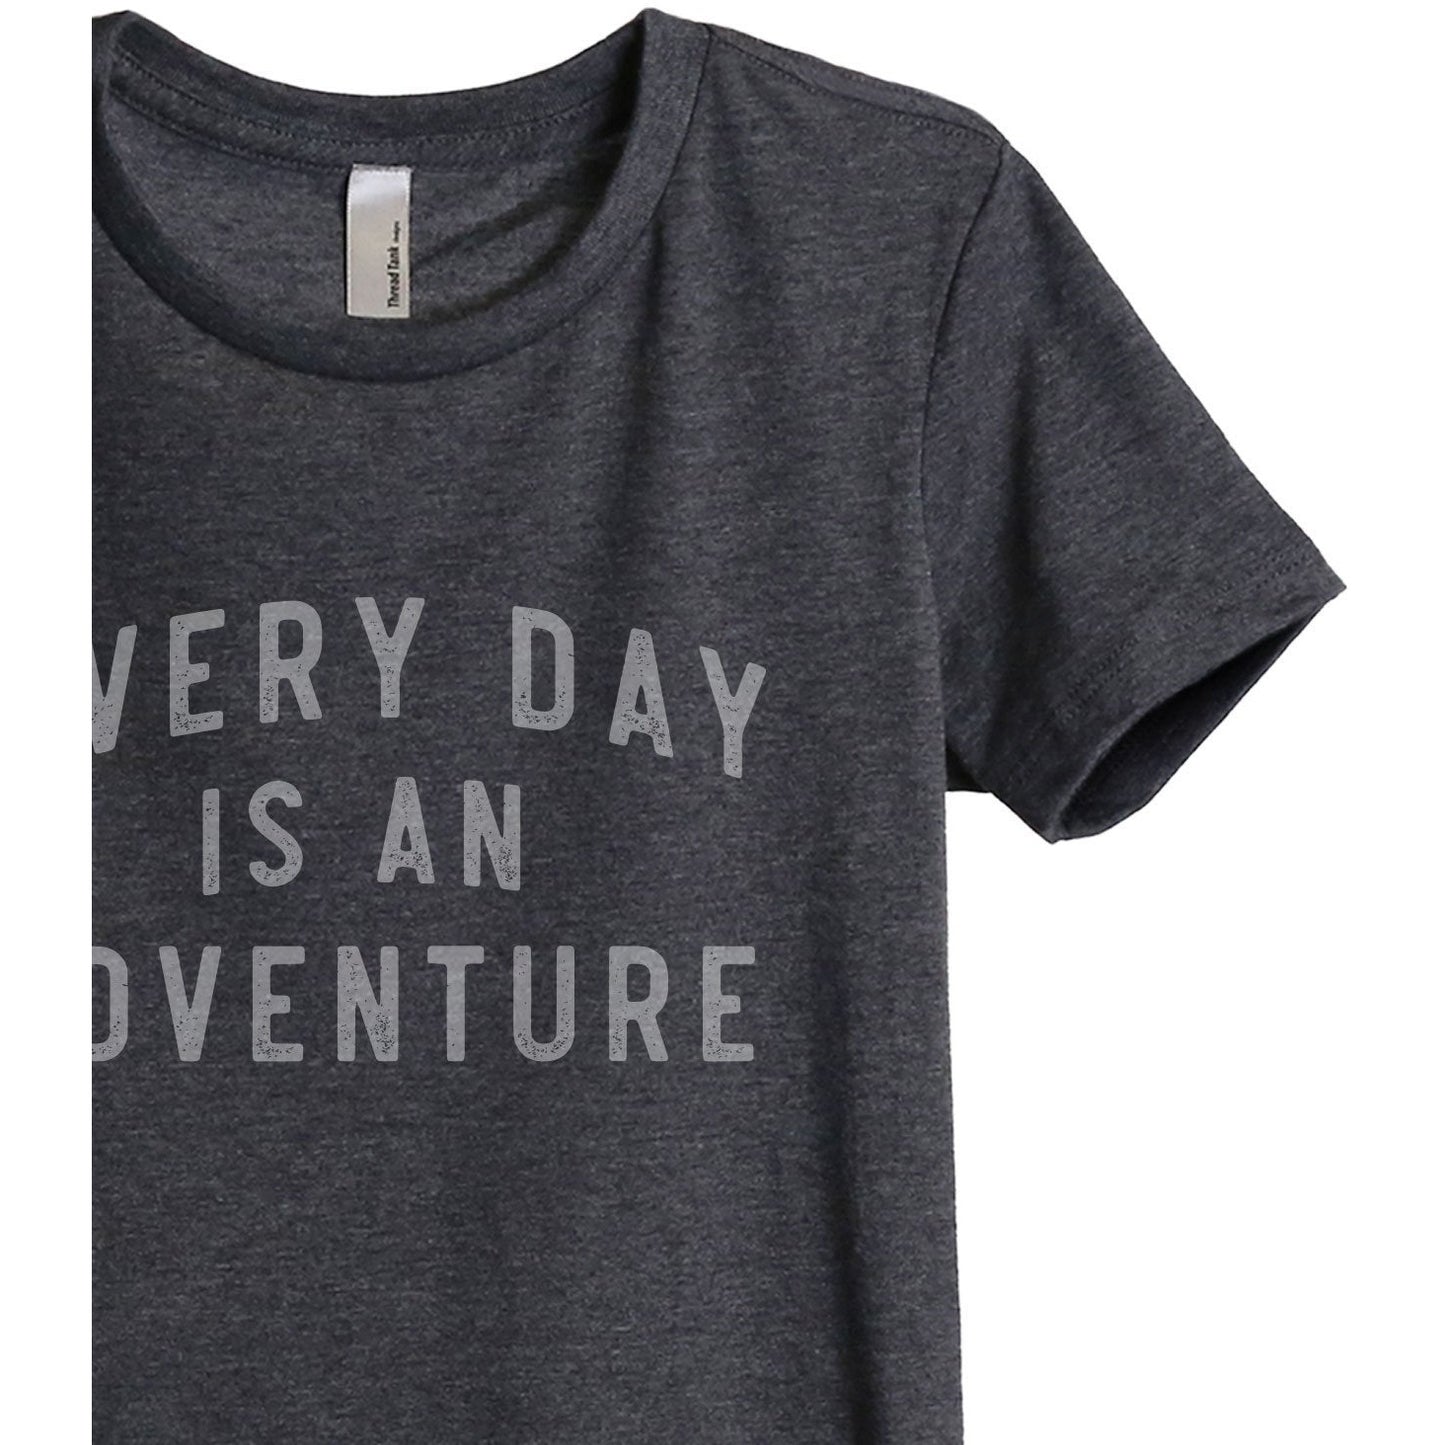 Everyday Is An Adventure Women's Relaxed Crewneck T-Shirt Top Tee Charcoal Grey Zoom Details